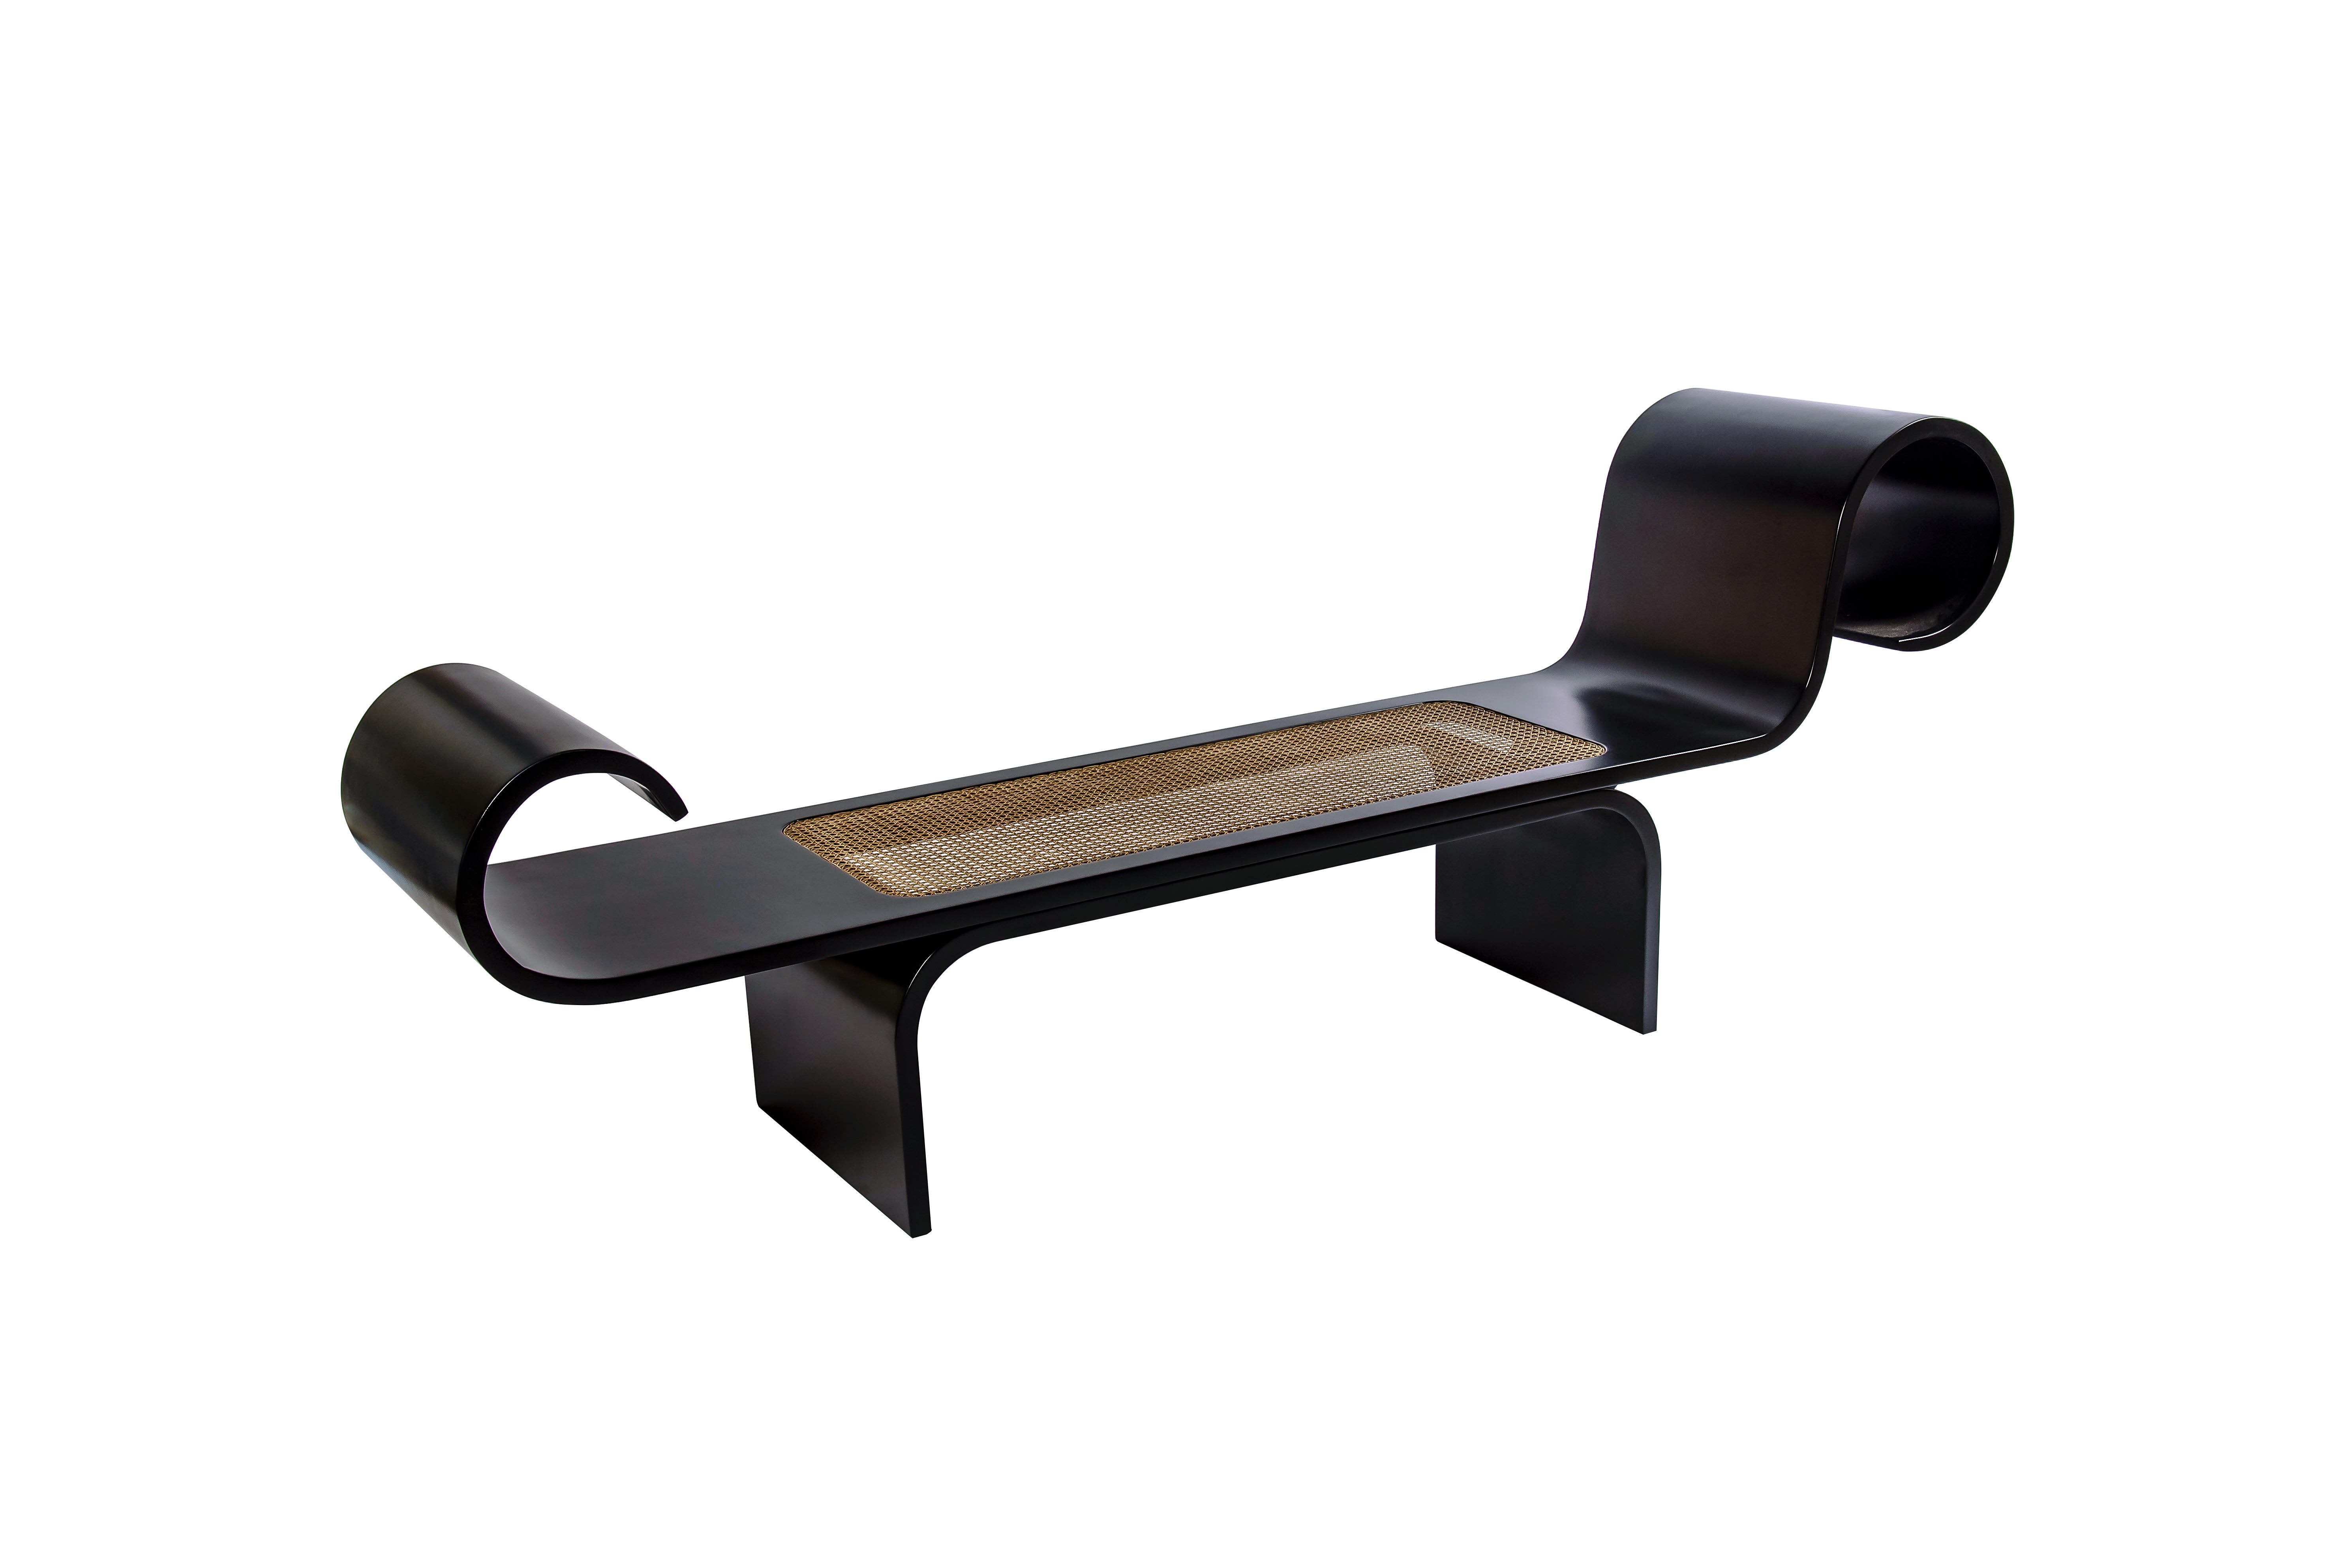 Oscar Niemeyer and Anna Maria Niemeyer, Marquesa Bench, c. 1978 (manufactured by Tendo Brasileira), 102 × 22 × 32 in., Los Angeles County Museum of Art, purchased with funds provided by the Bernard and Edith Lewin Collection of Mexican Art Deaccession Fund